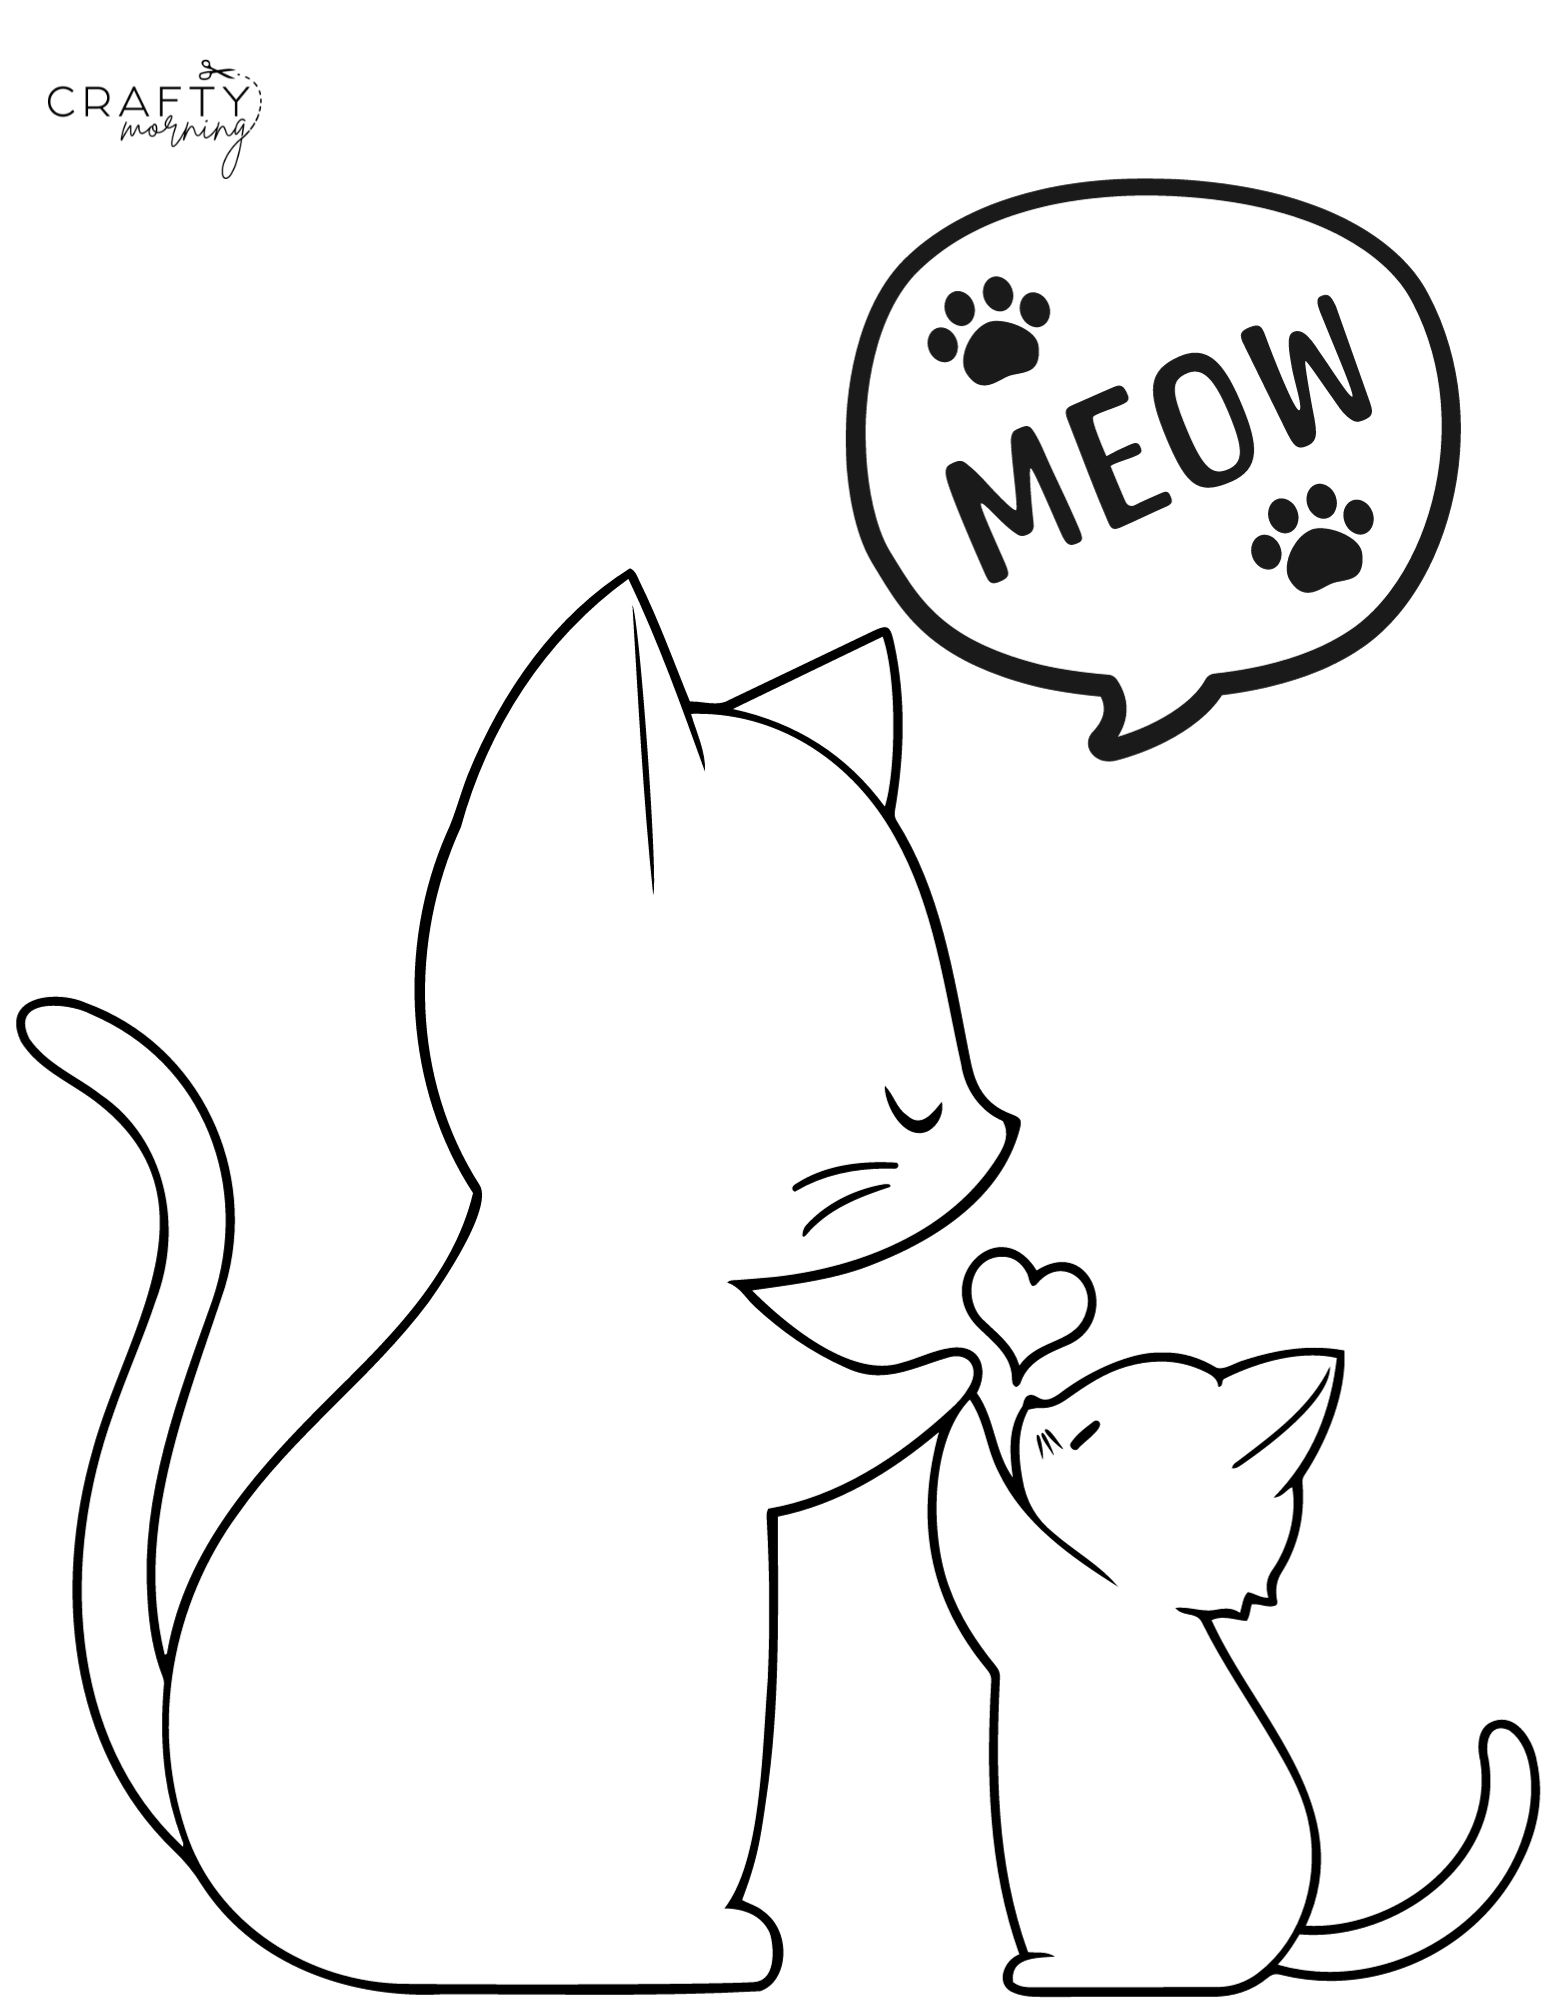 baby kitten coloring pages